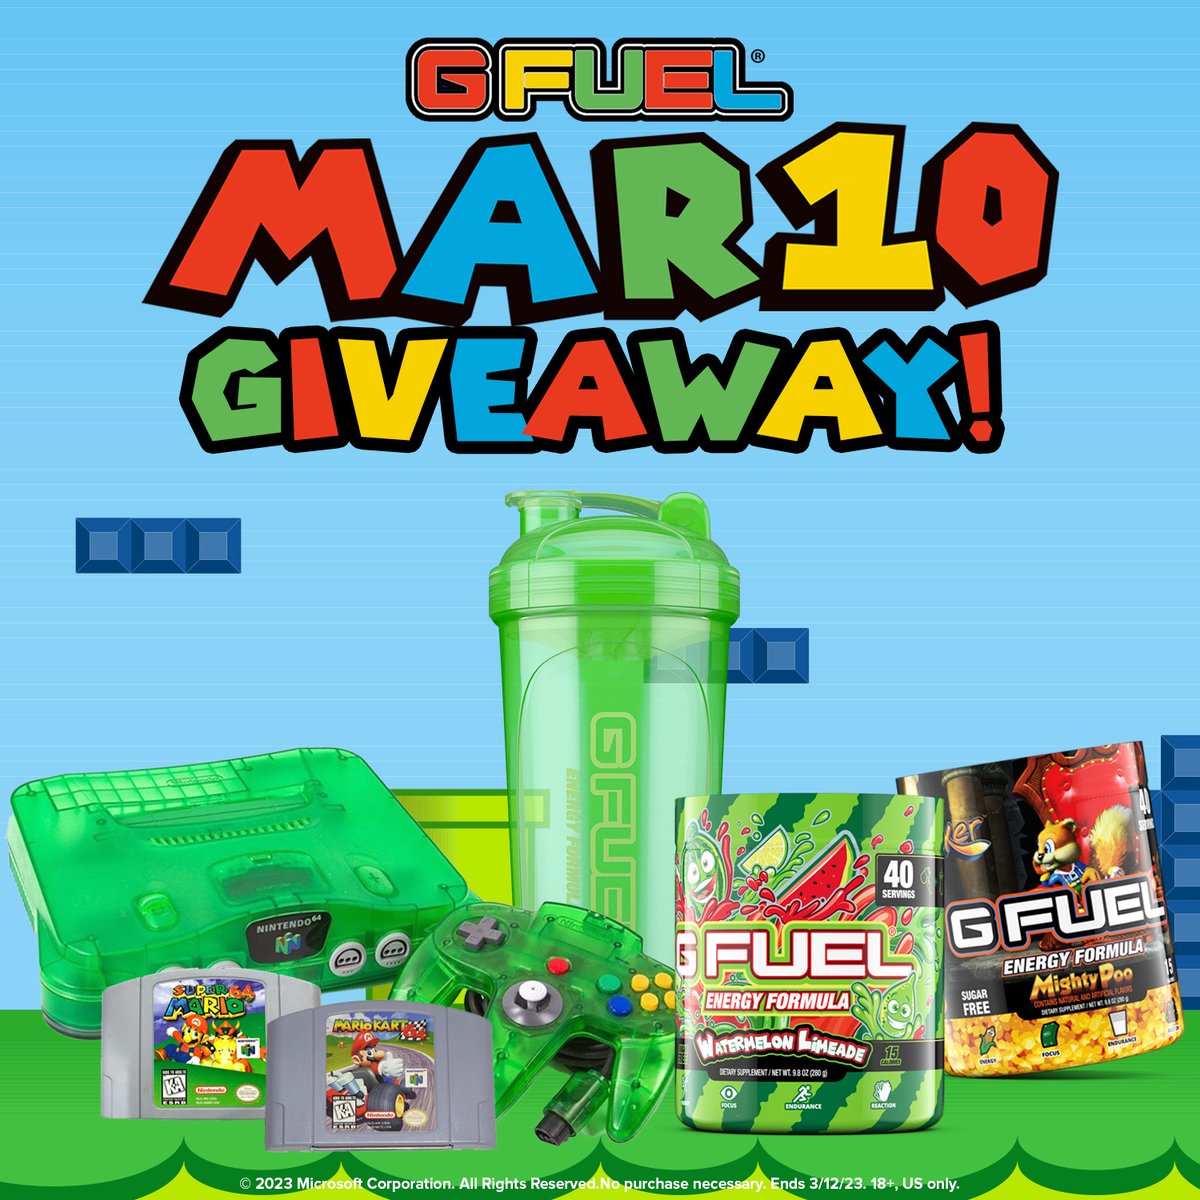 💚 𝗟𝗜𝗞𝗘 + 𝗥𝗧 + 𝗧𝗔𝗚 𝗔 𝗙𝗥𝗜𝗘𝗡𝗗 to enter our EPIC #MAR10DAY x #GFUEL GIVEAWAY!!! Picking 5 winners on Monday to celebrate our MAR10 DAY FLASH SALE! ⭐ 1 GRAND PRIZE WINNER = WINS EVERYTHING! 🍄 4 RUNNERS UP = WIN A STARTER KIT! 🛍️ 𝗦𝗛𝗢𝗣: GFUEL.ly/mar10-tw